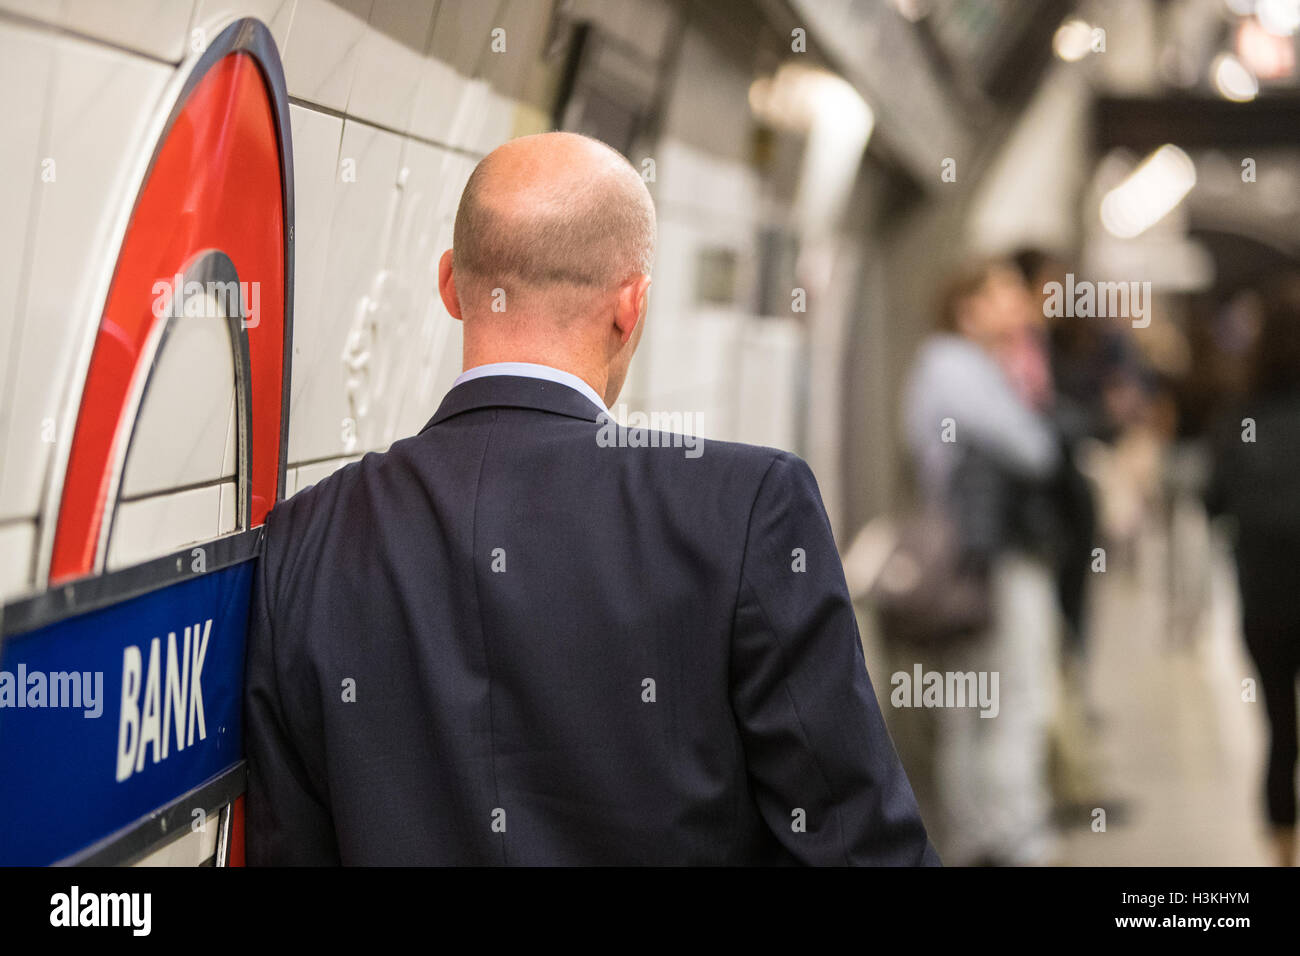 A man waiting for a train at Bank station on the London underground rear view with blurry background including logo roundel for transport for london Stock Photo